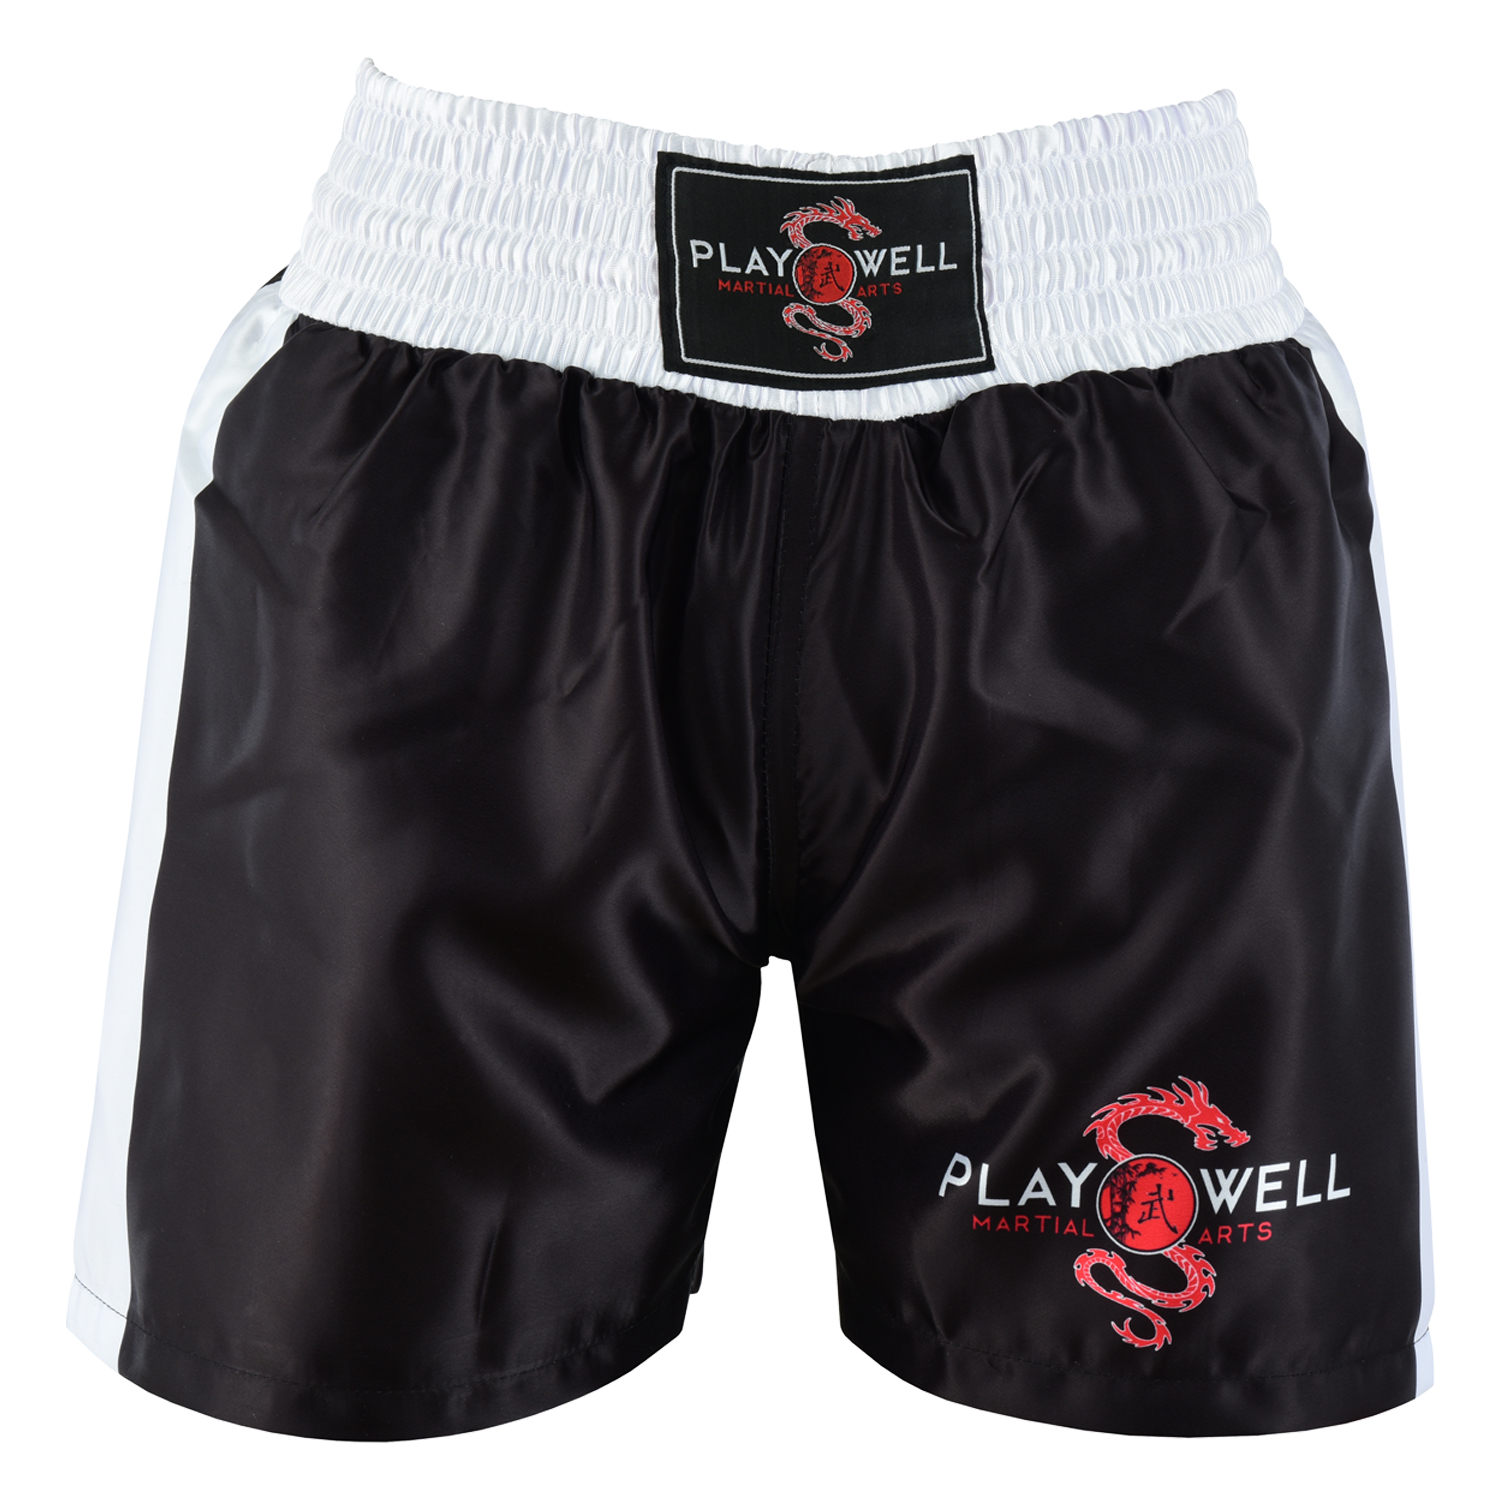 Childrens Competition Boxing Shorts - Black/White - Click Image to Close